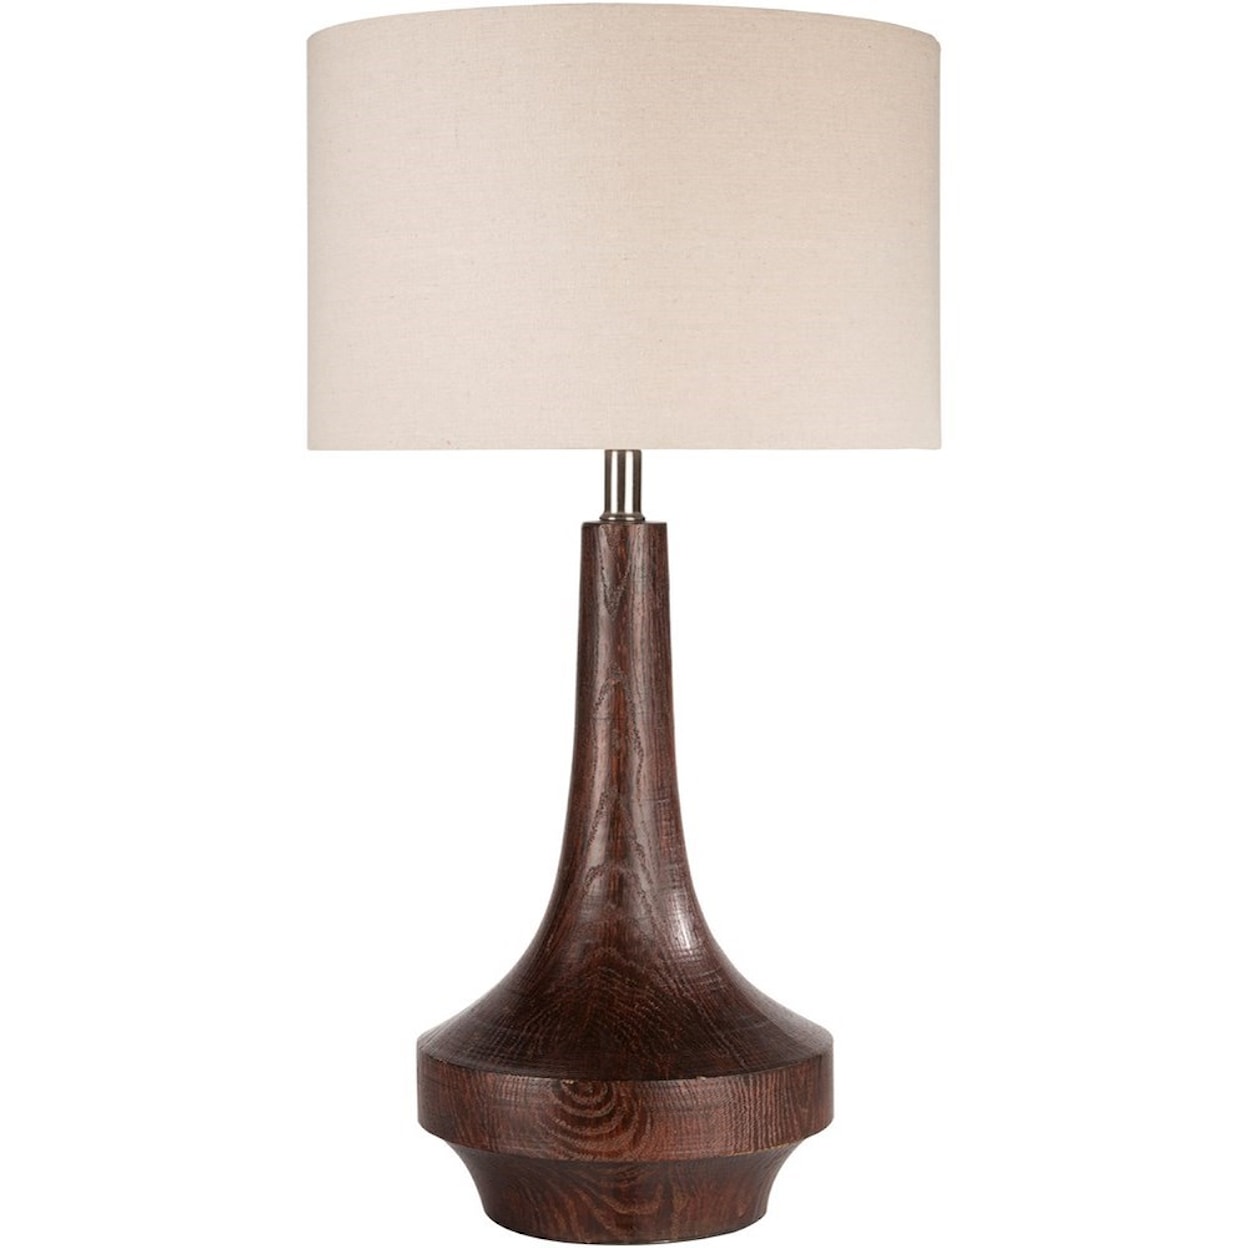 Surya Carson Brown Wood Tone Contemporary Table Lamp